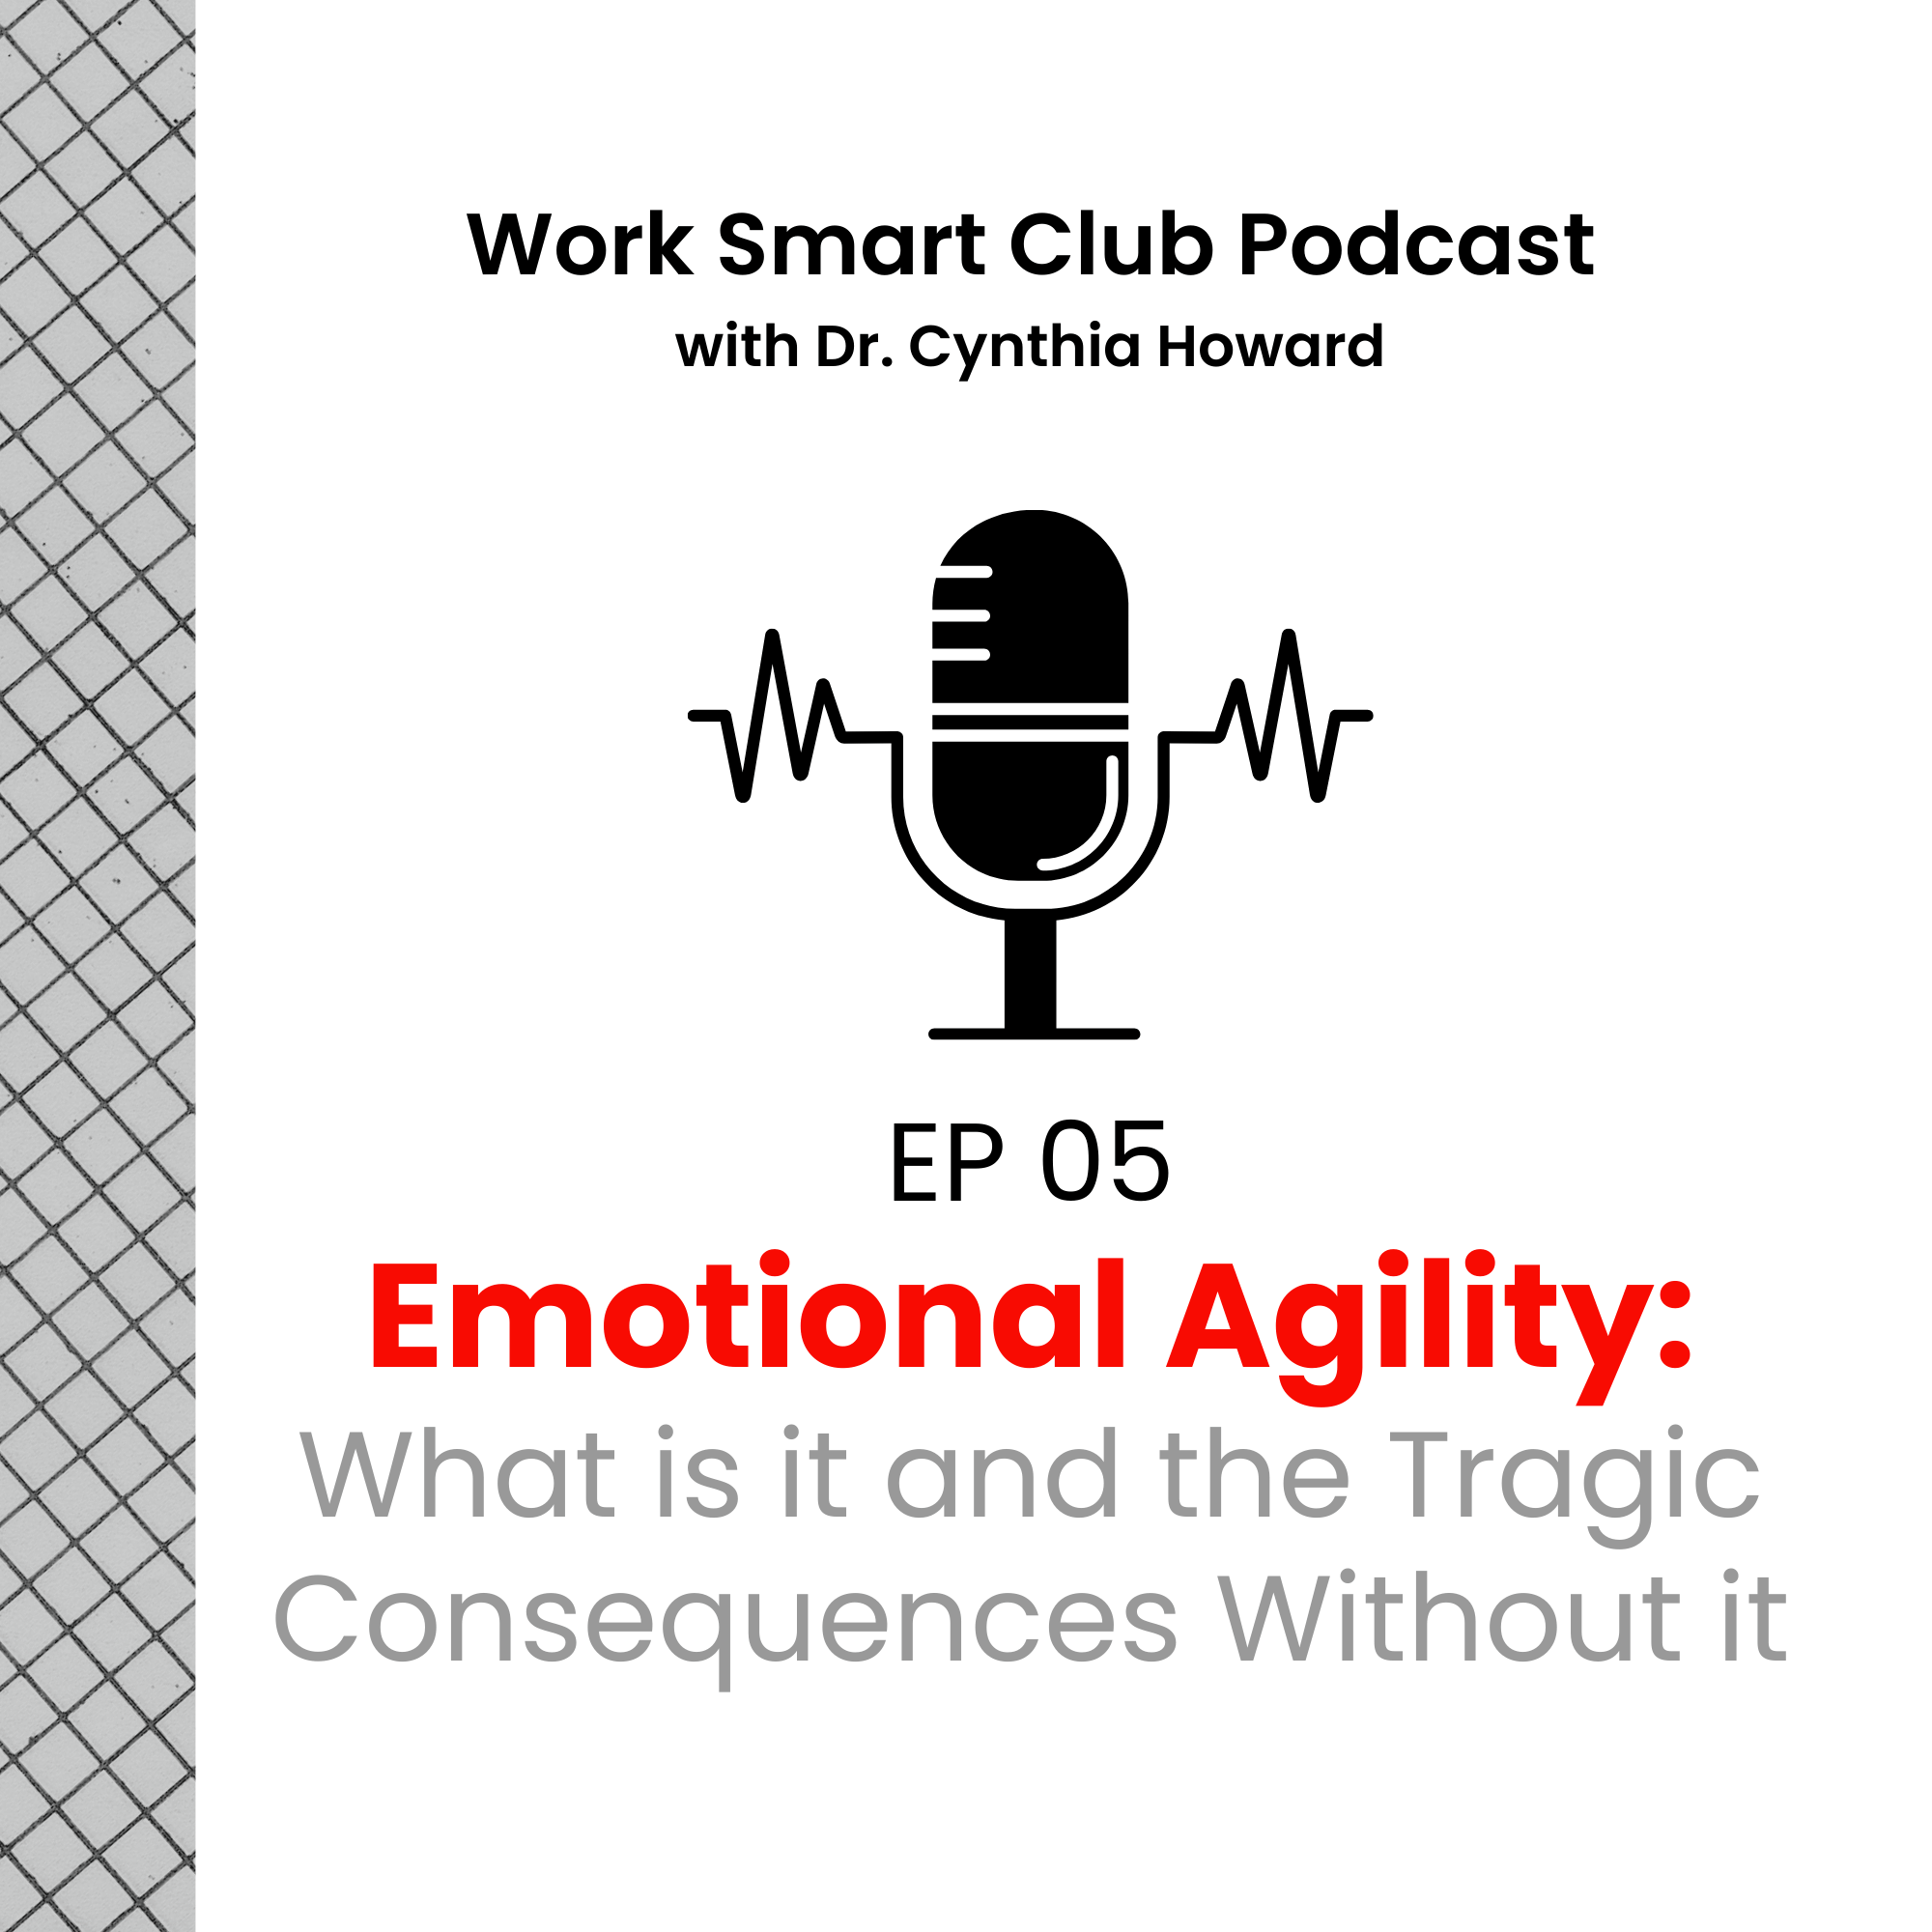 EP 05: Emotional Agility: What is it and the Tragic Consequences Without it